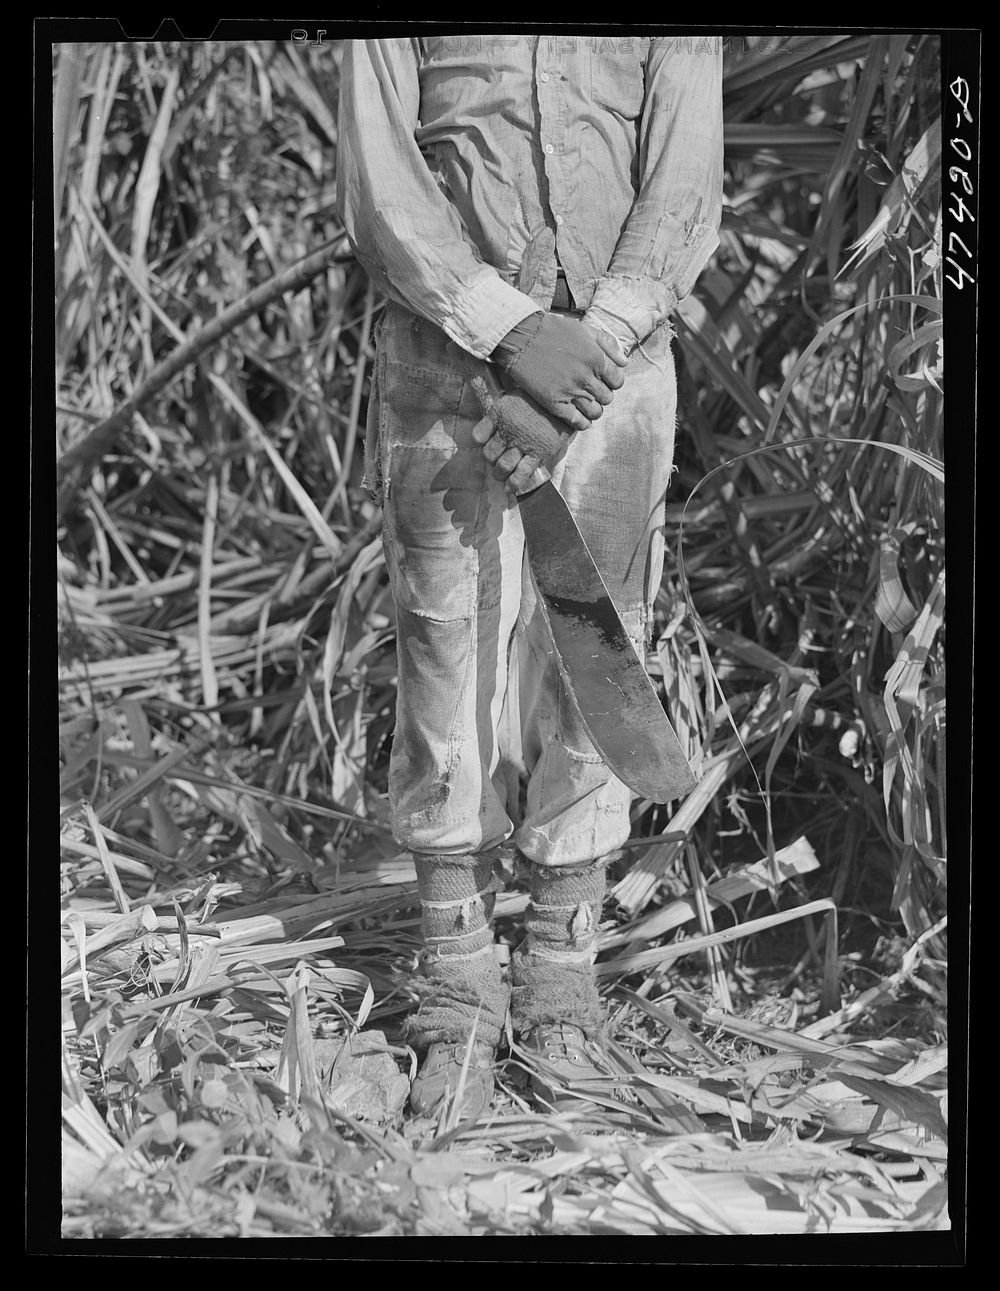 Guanica, Puerto Rico (vicinity). Most sugar cane cutters take these precautions against the sharp needles found in the cane.…